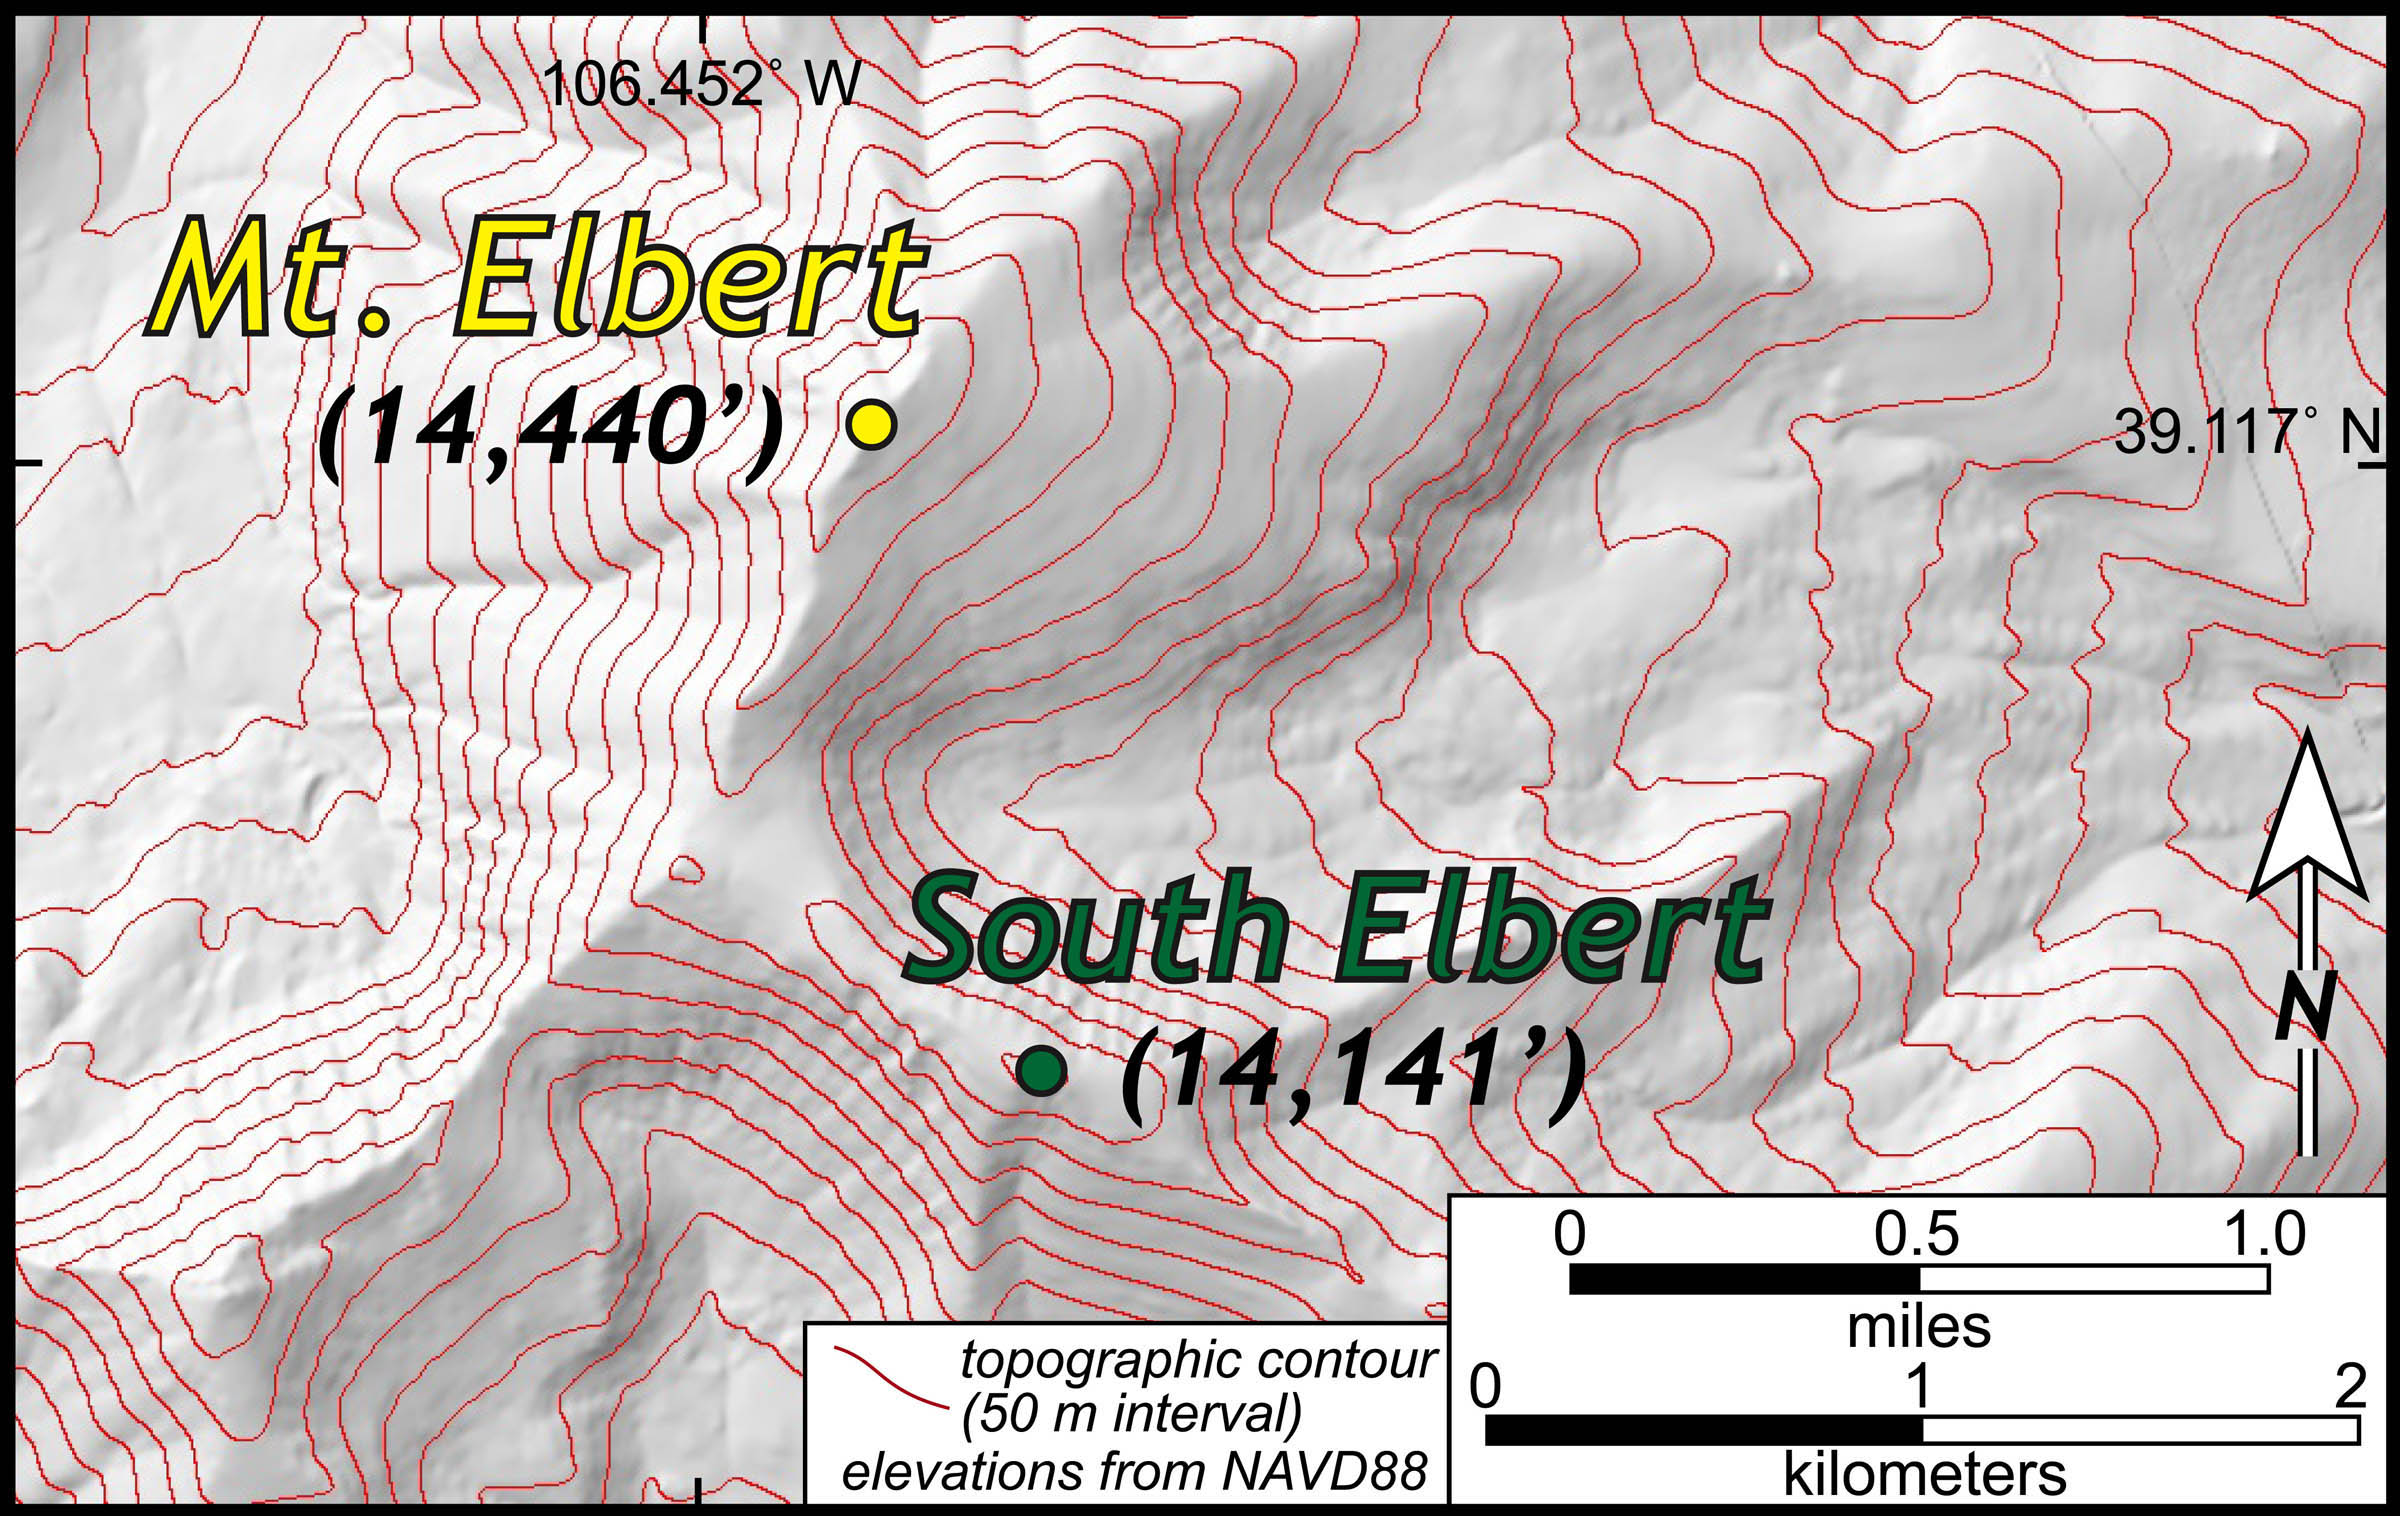 1:62500 Scale Historical 15 X 15 Minute 1935 Updated 1963 21 x 16.8 in YellowMaps Mount Elbert CO topo map